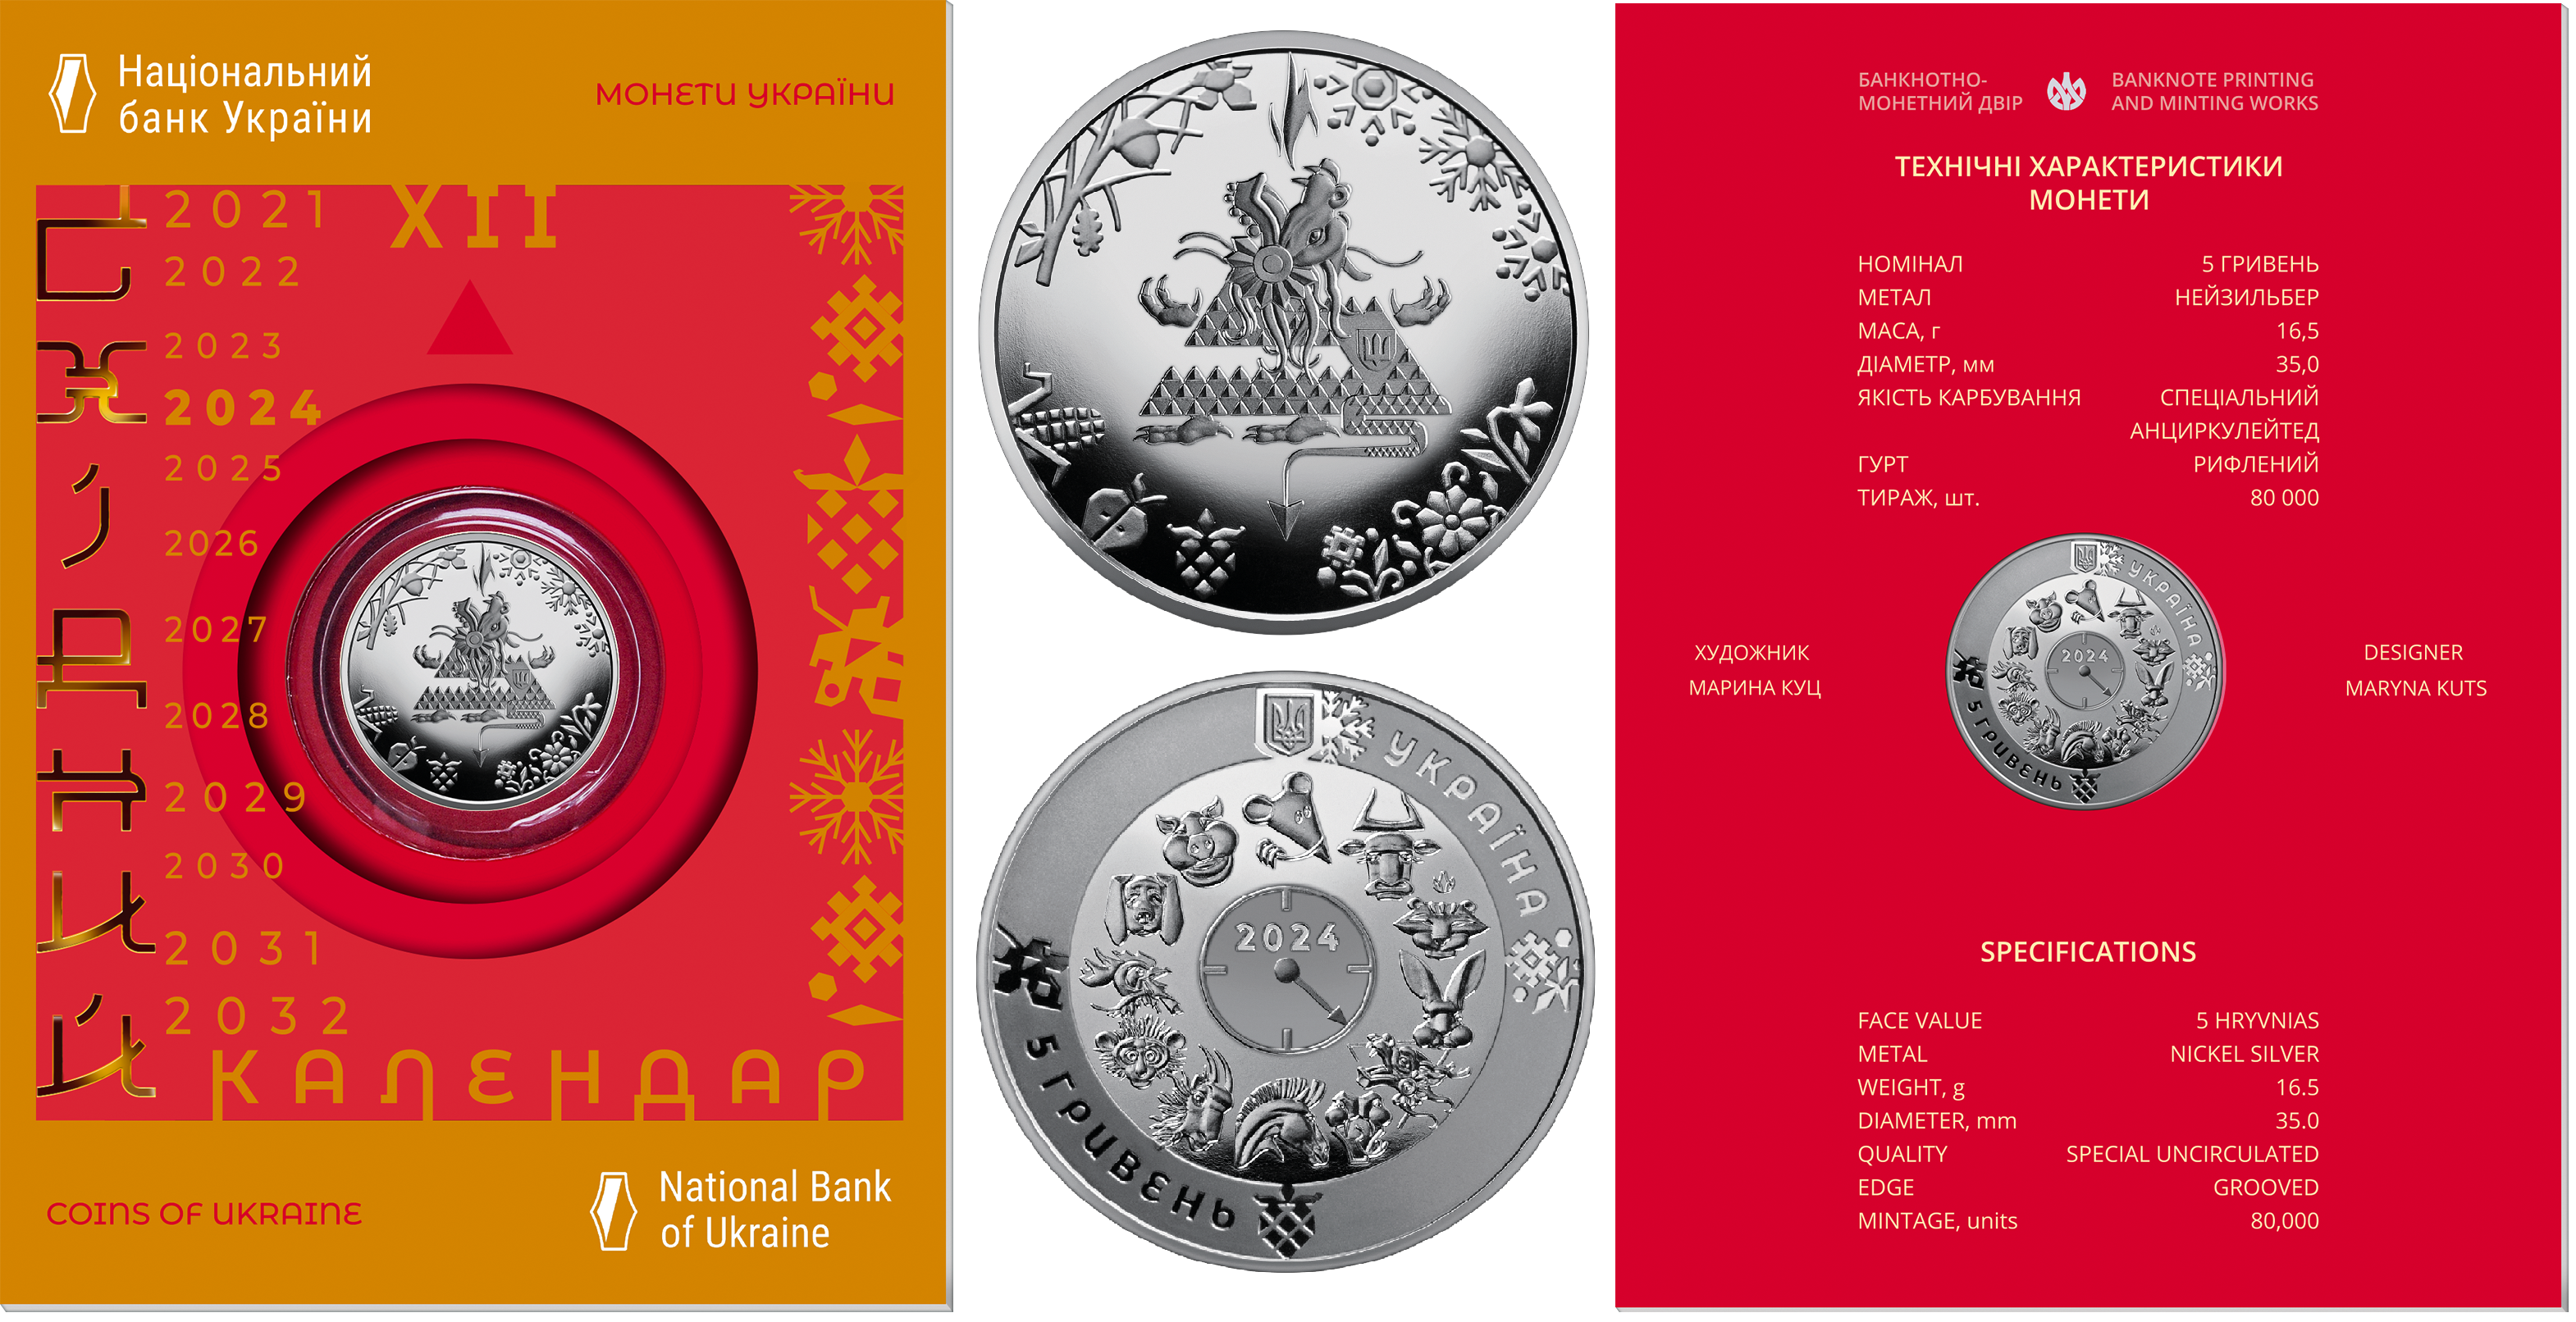 Sale of commemorative coins from MTB BANK • buy commemorative coins in Ukraine at MTB BANK - photo 5 - mtb.ua